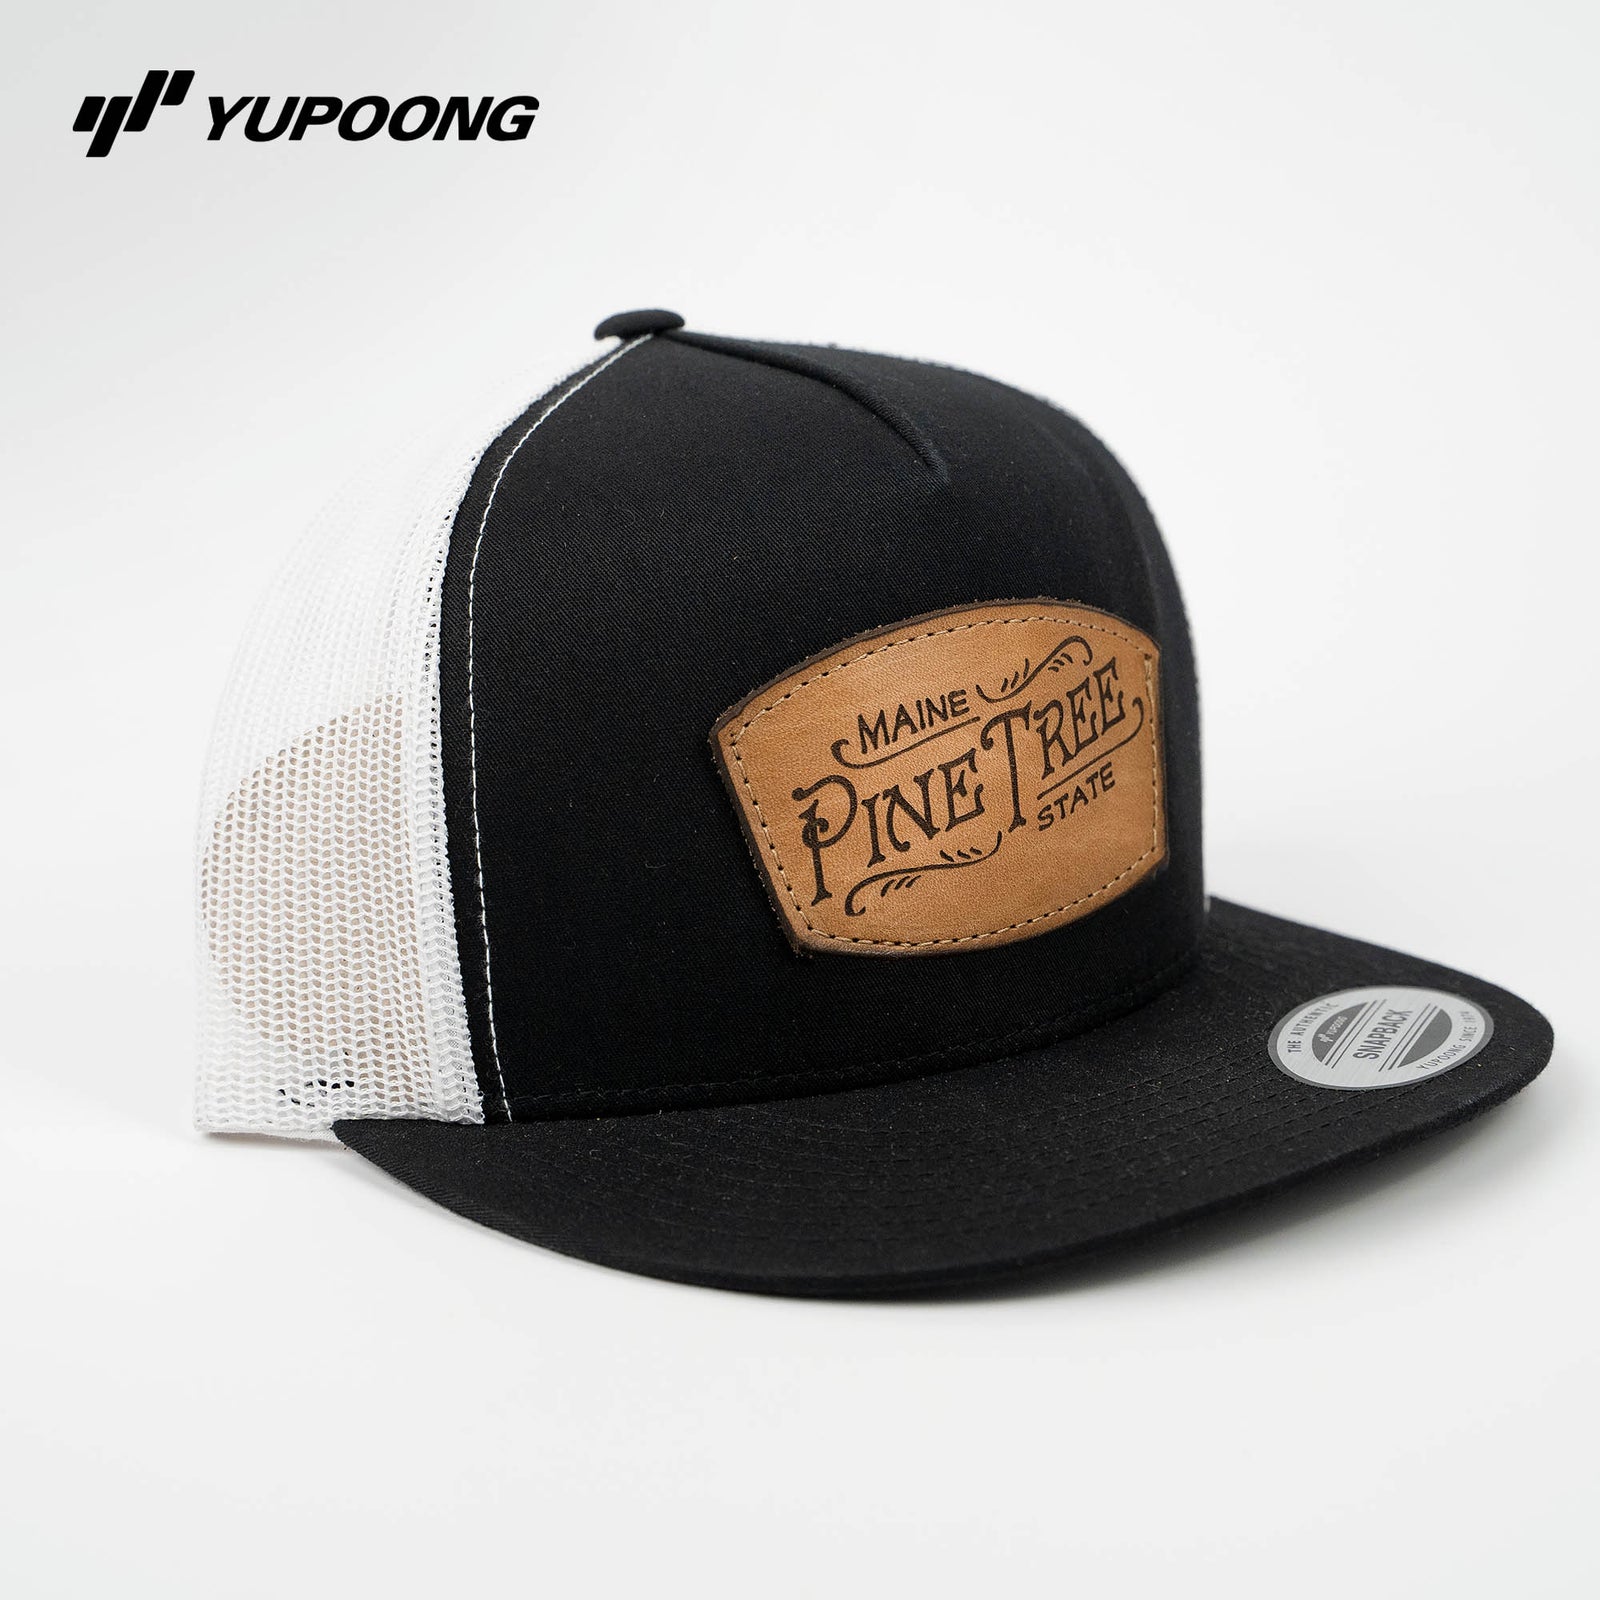 Lasered Leather Patch Trucker Mesh Snapback Hat ~ Yupoong 6006 Cap ~ Customized with YOUR LOGO